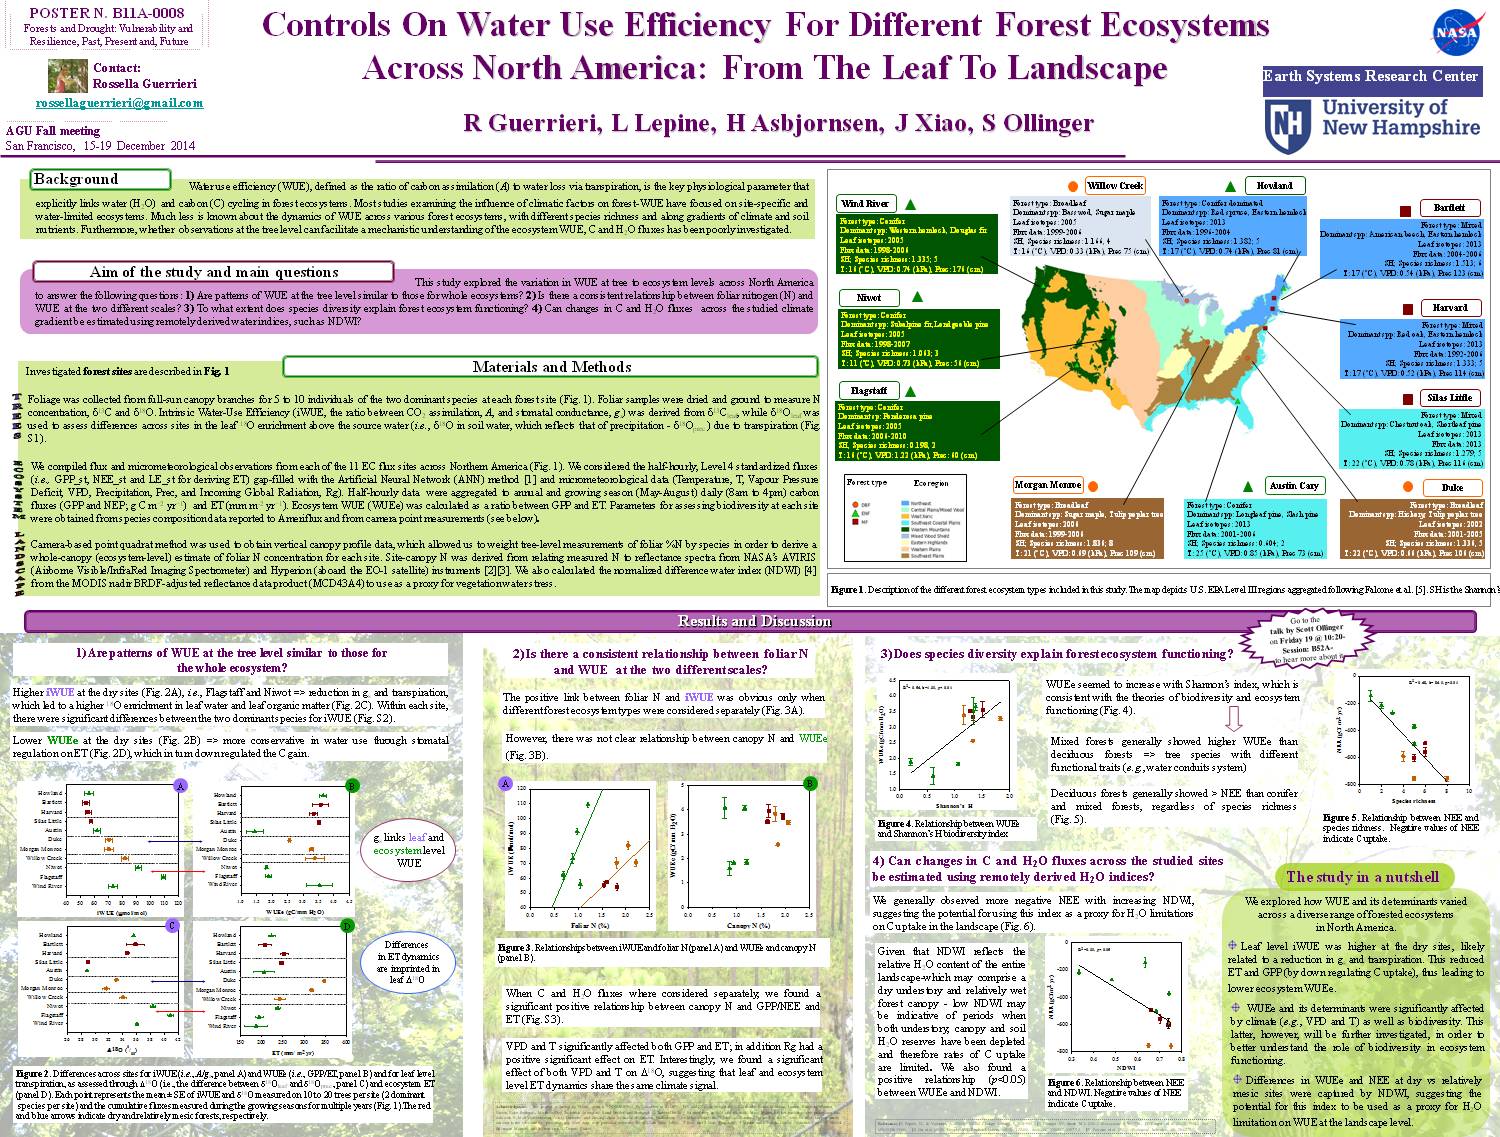 Controls On Water Use Efficiency For Different Forest Ecosystems Across North America: From The Leaf To Landscape by rogue77